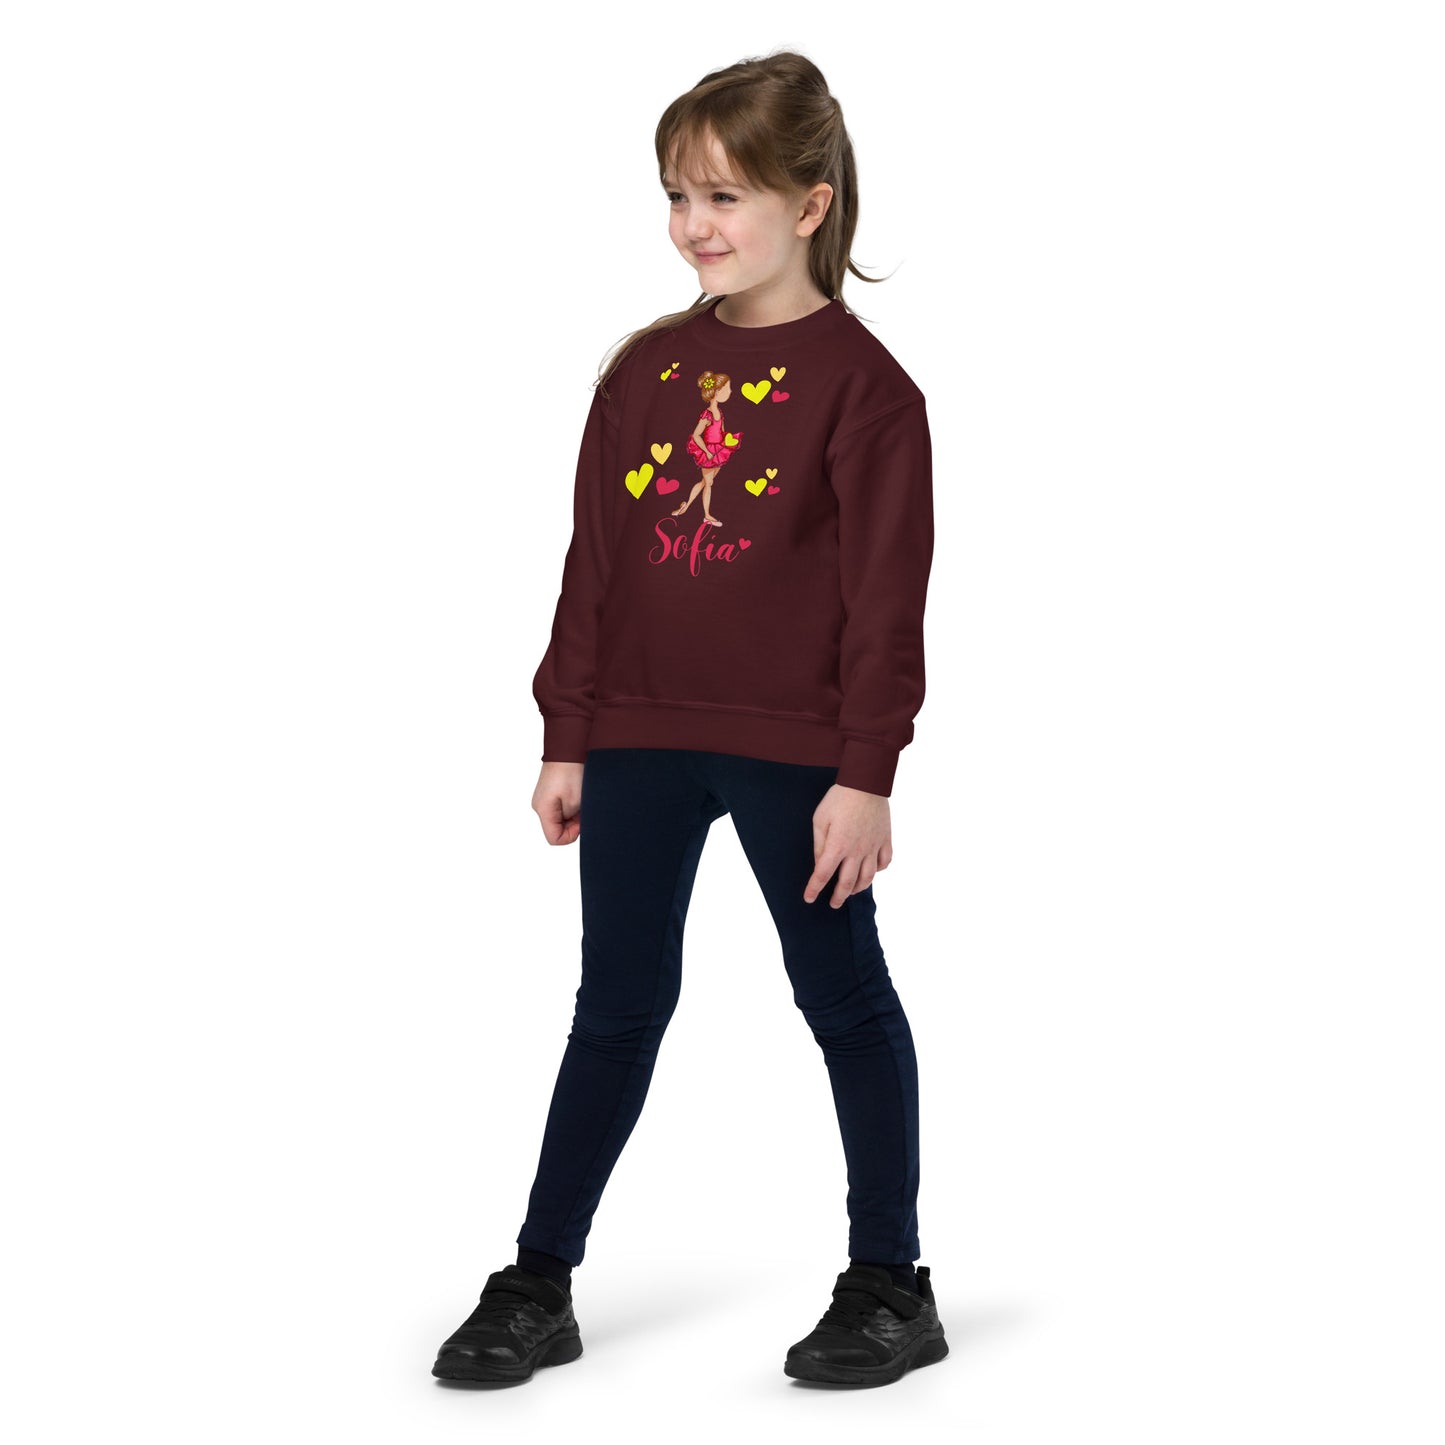 a young girl wearing a red sweatshirt and jeans